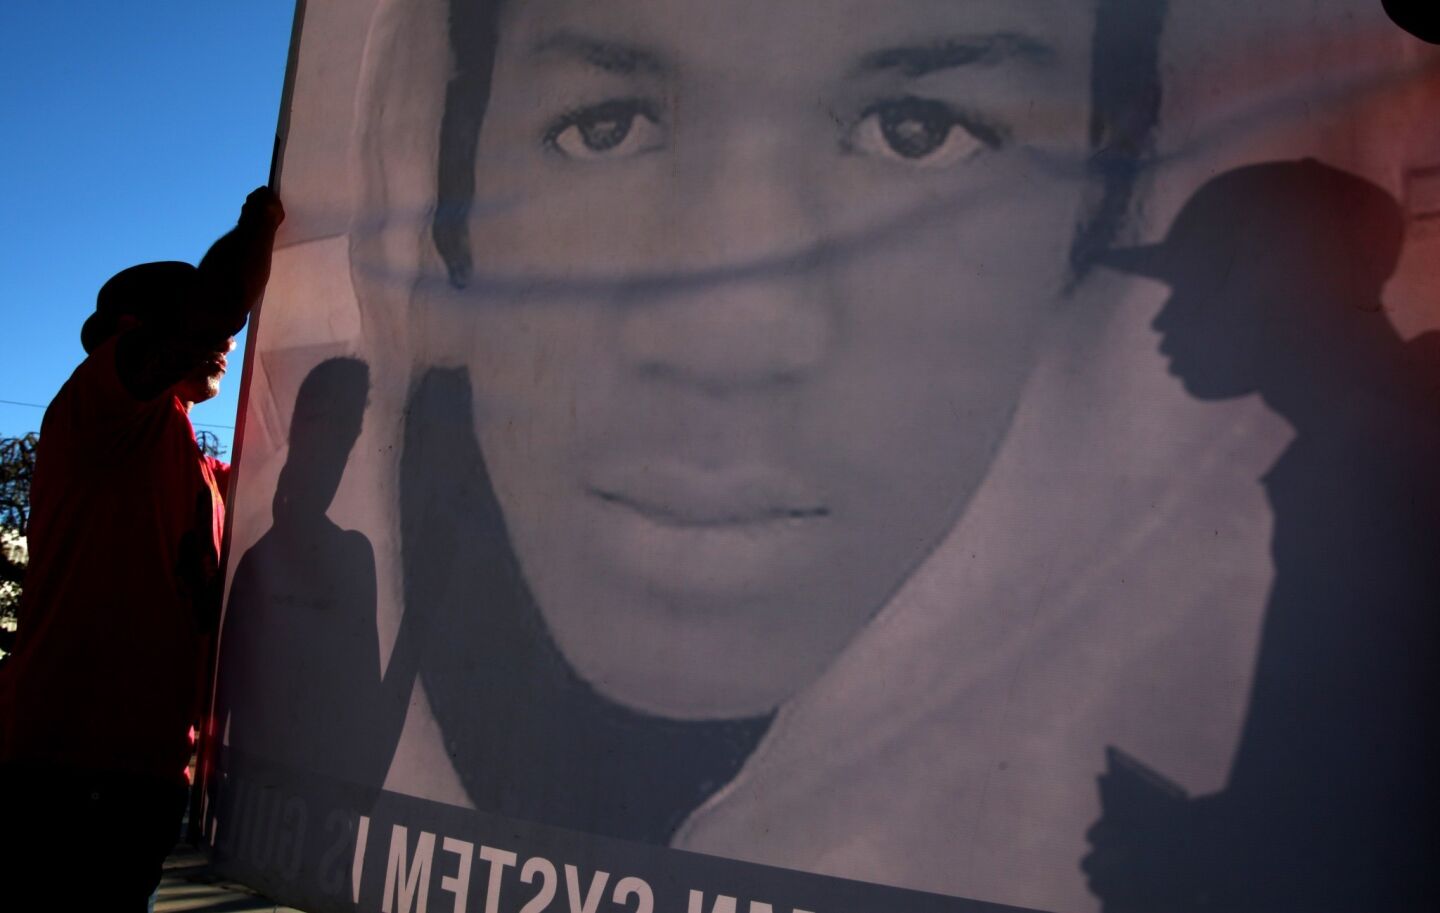 Protesters gathered at Leimert Park on Tuesday afternoon to protest the verdict in the George Zimmerman trial, holding signs and banners with Trayvon Martin's face.